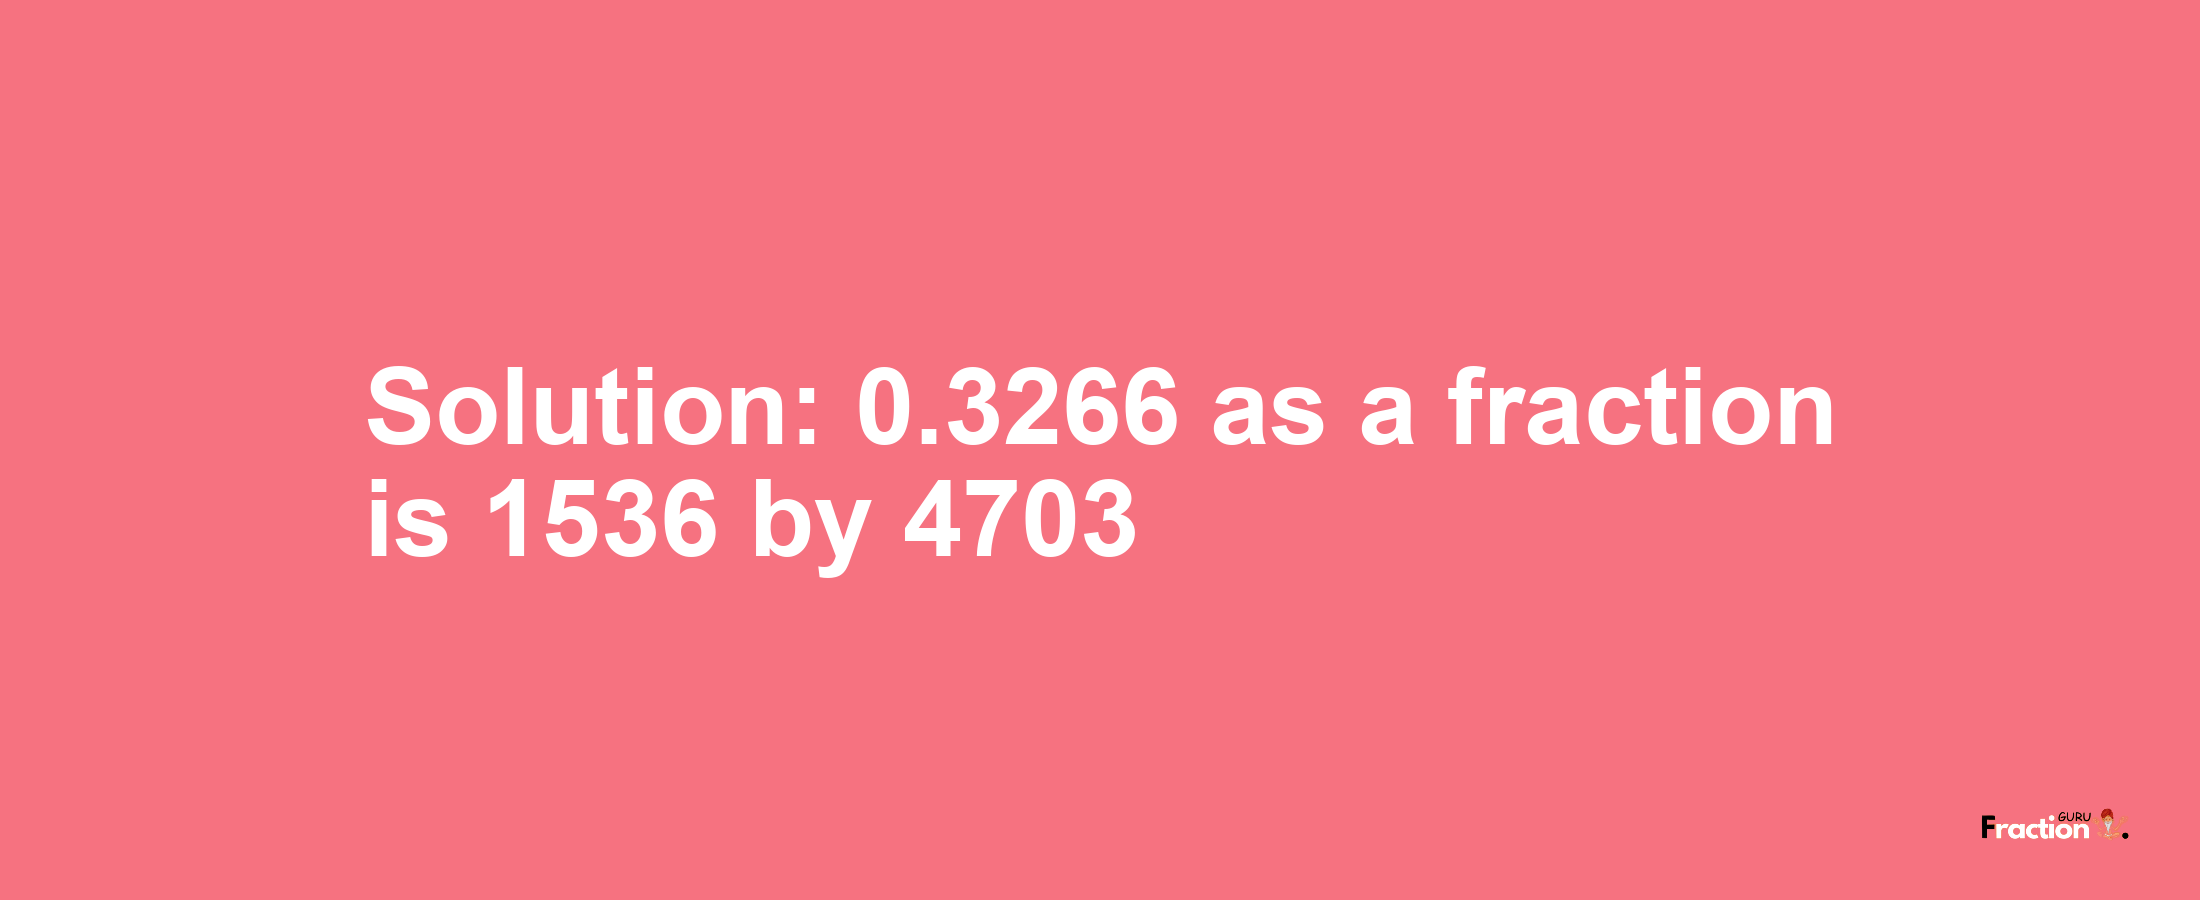 Solution:0.3266 as a fraction is 1536/4703